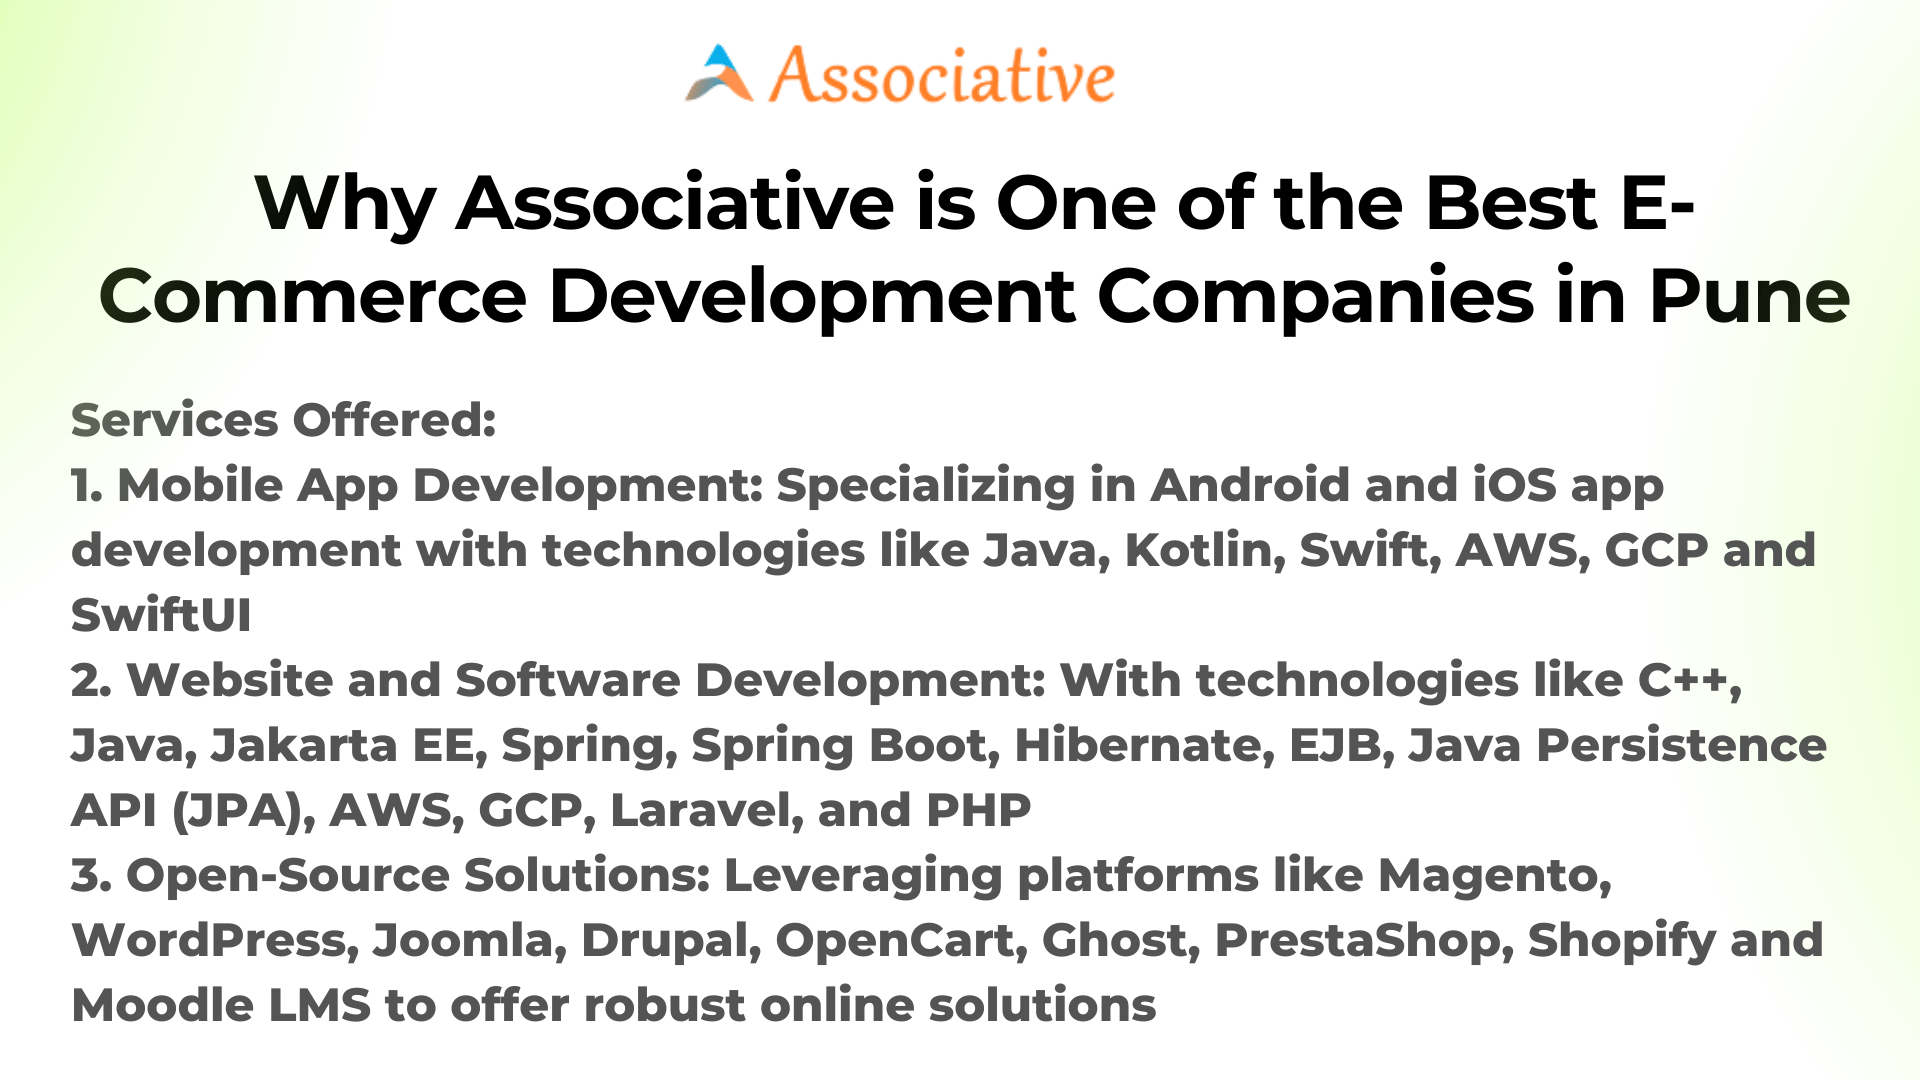 Why Associative is One of the Best E-Commerce Development Companies in Pune